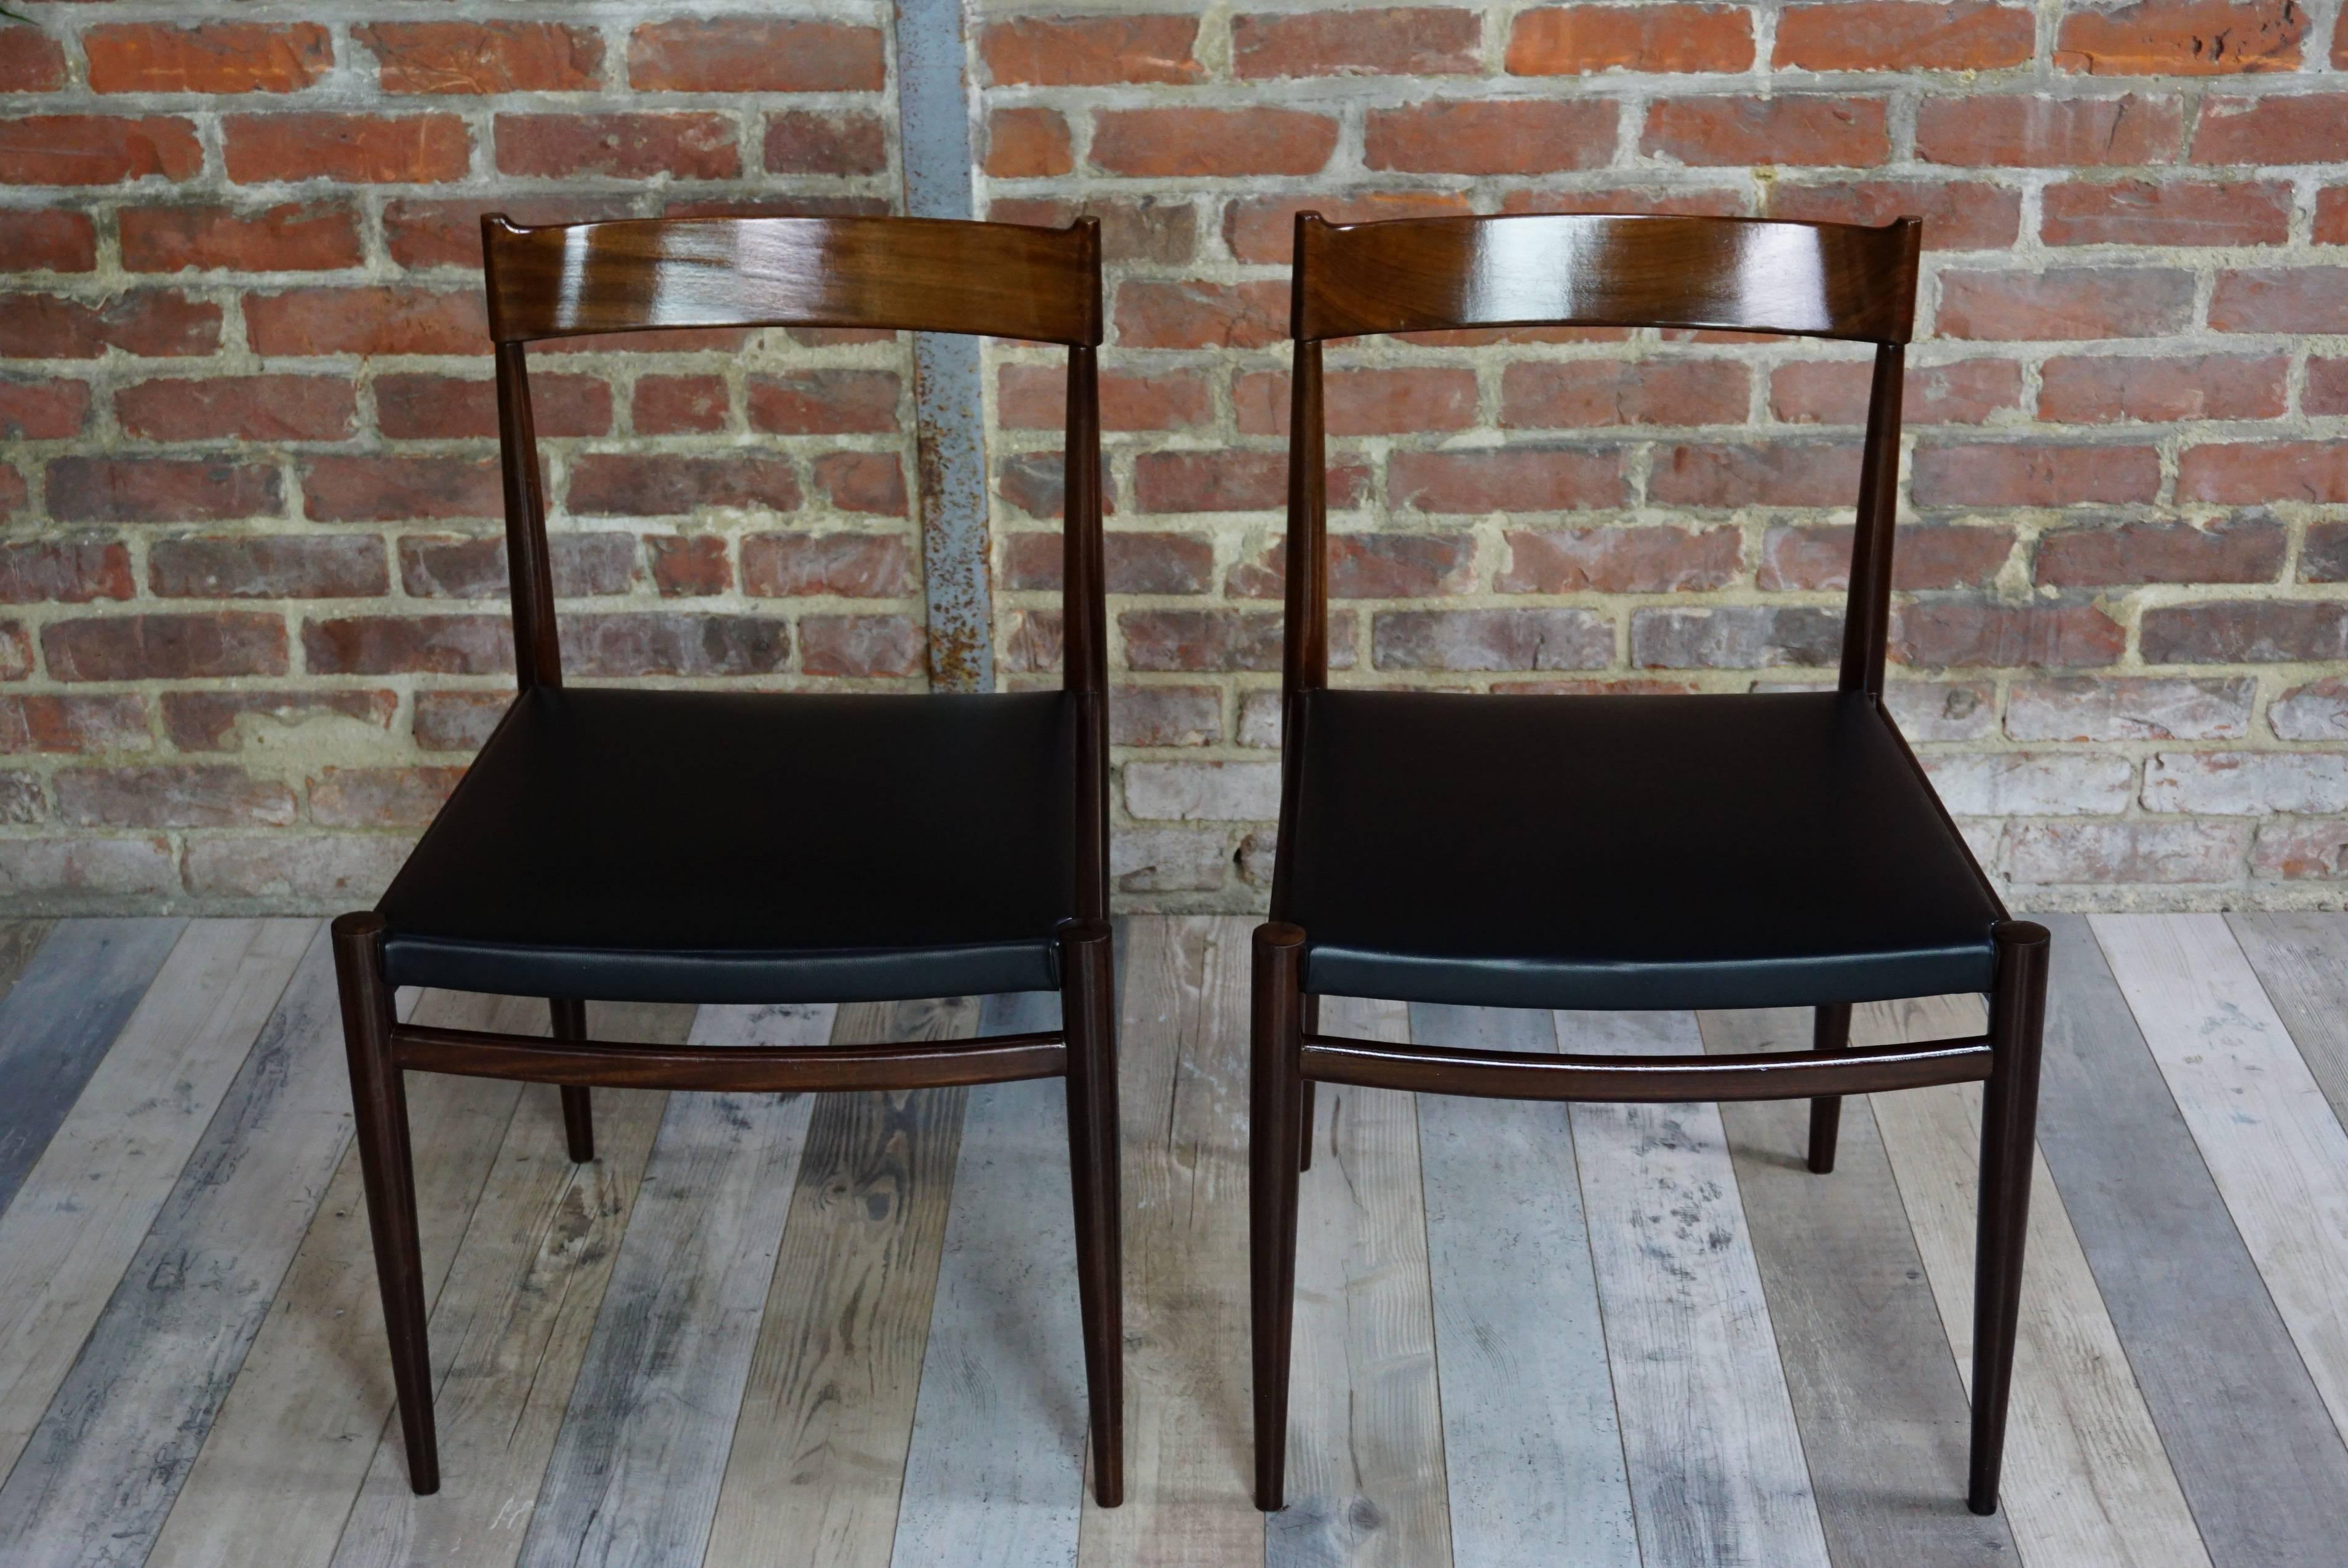 Work of the 1950s worthy of the famous designers of the Far North countries like Finn Juhl, these chairs have a structure in teak dark, a back slightly curved and a comfortable seat in imitation black leather.